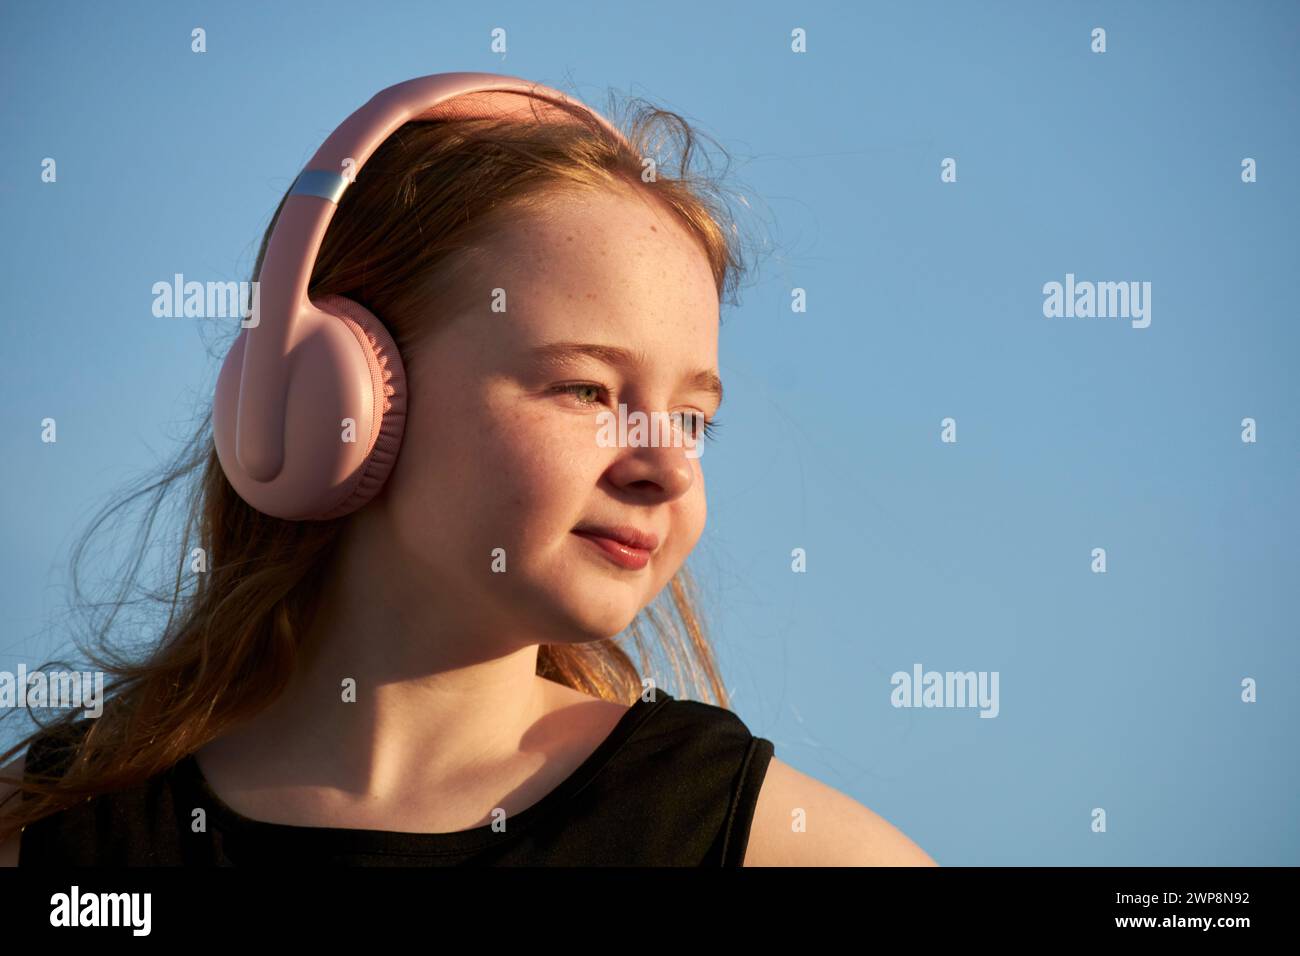 young 10 year old british irish girl wearing black dress and headphones during golden hour sunset Lanzarote, Canary Islands, spain Stock Photo